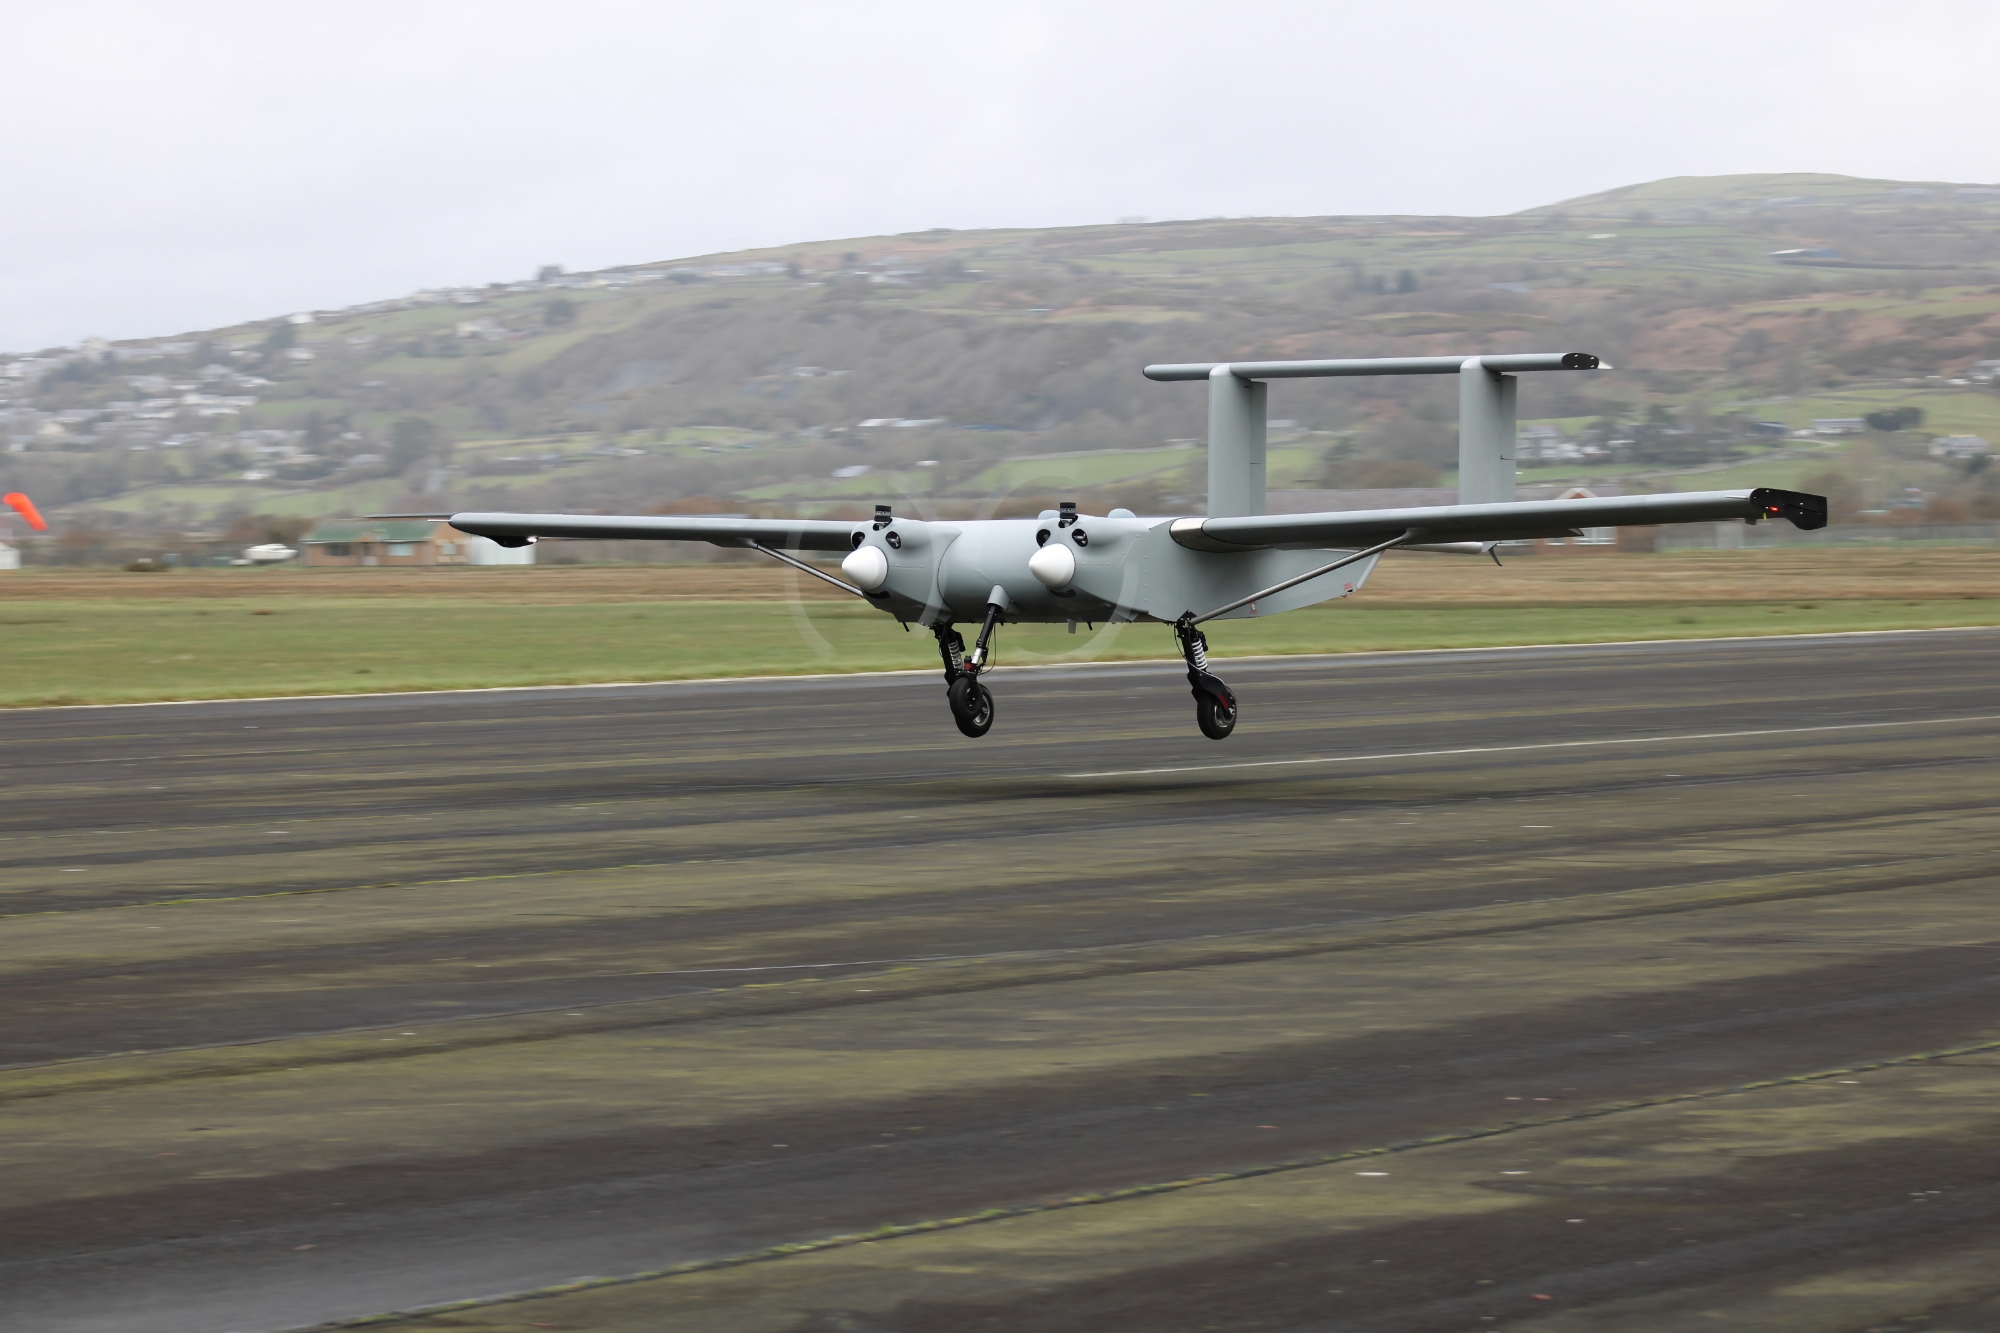 The AFU uses the British ULTRA UAV with a payload of up to 100kg and the ability to fly up to 1,000km.